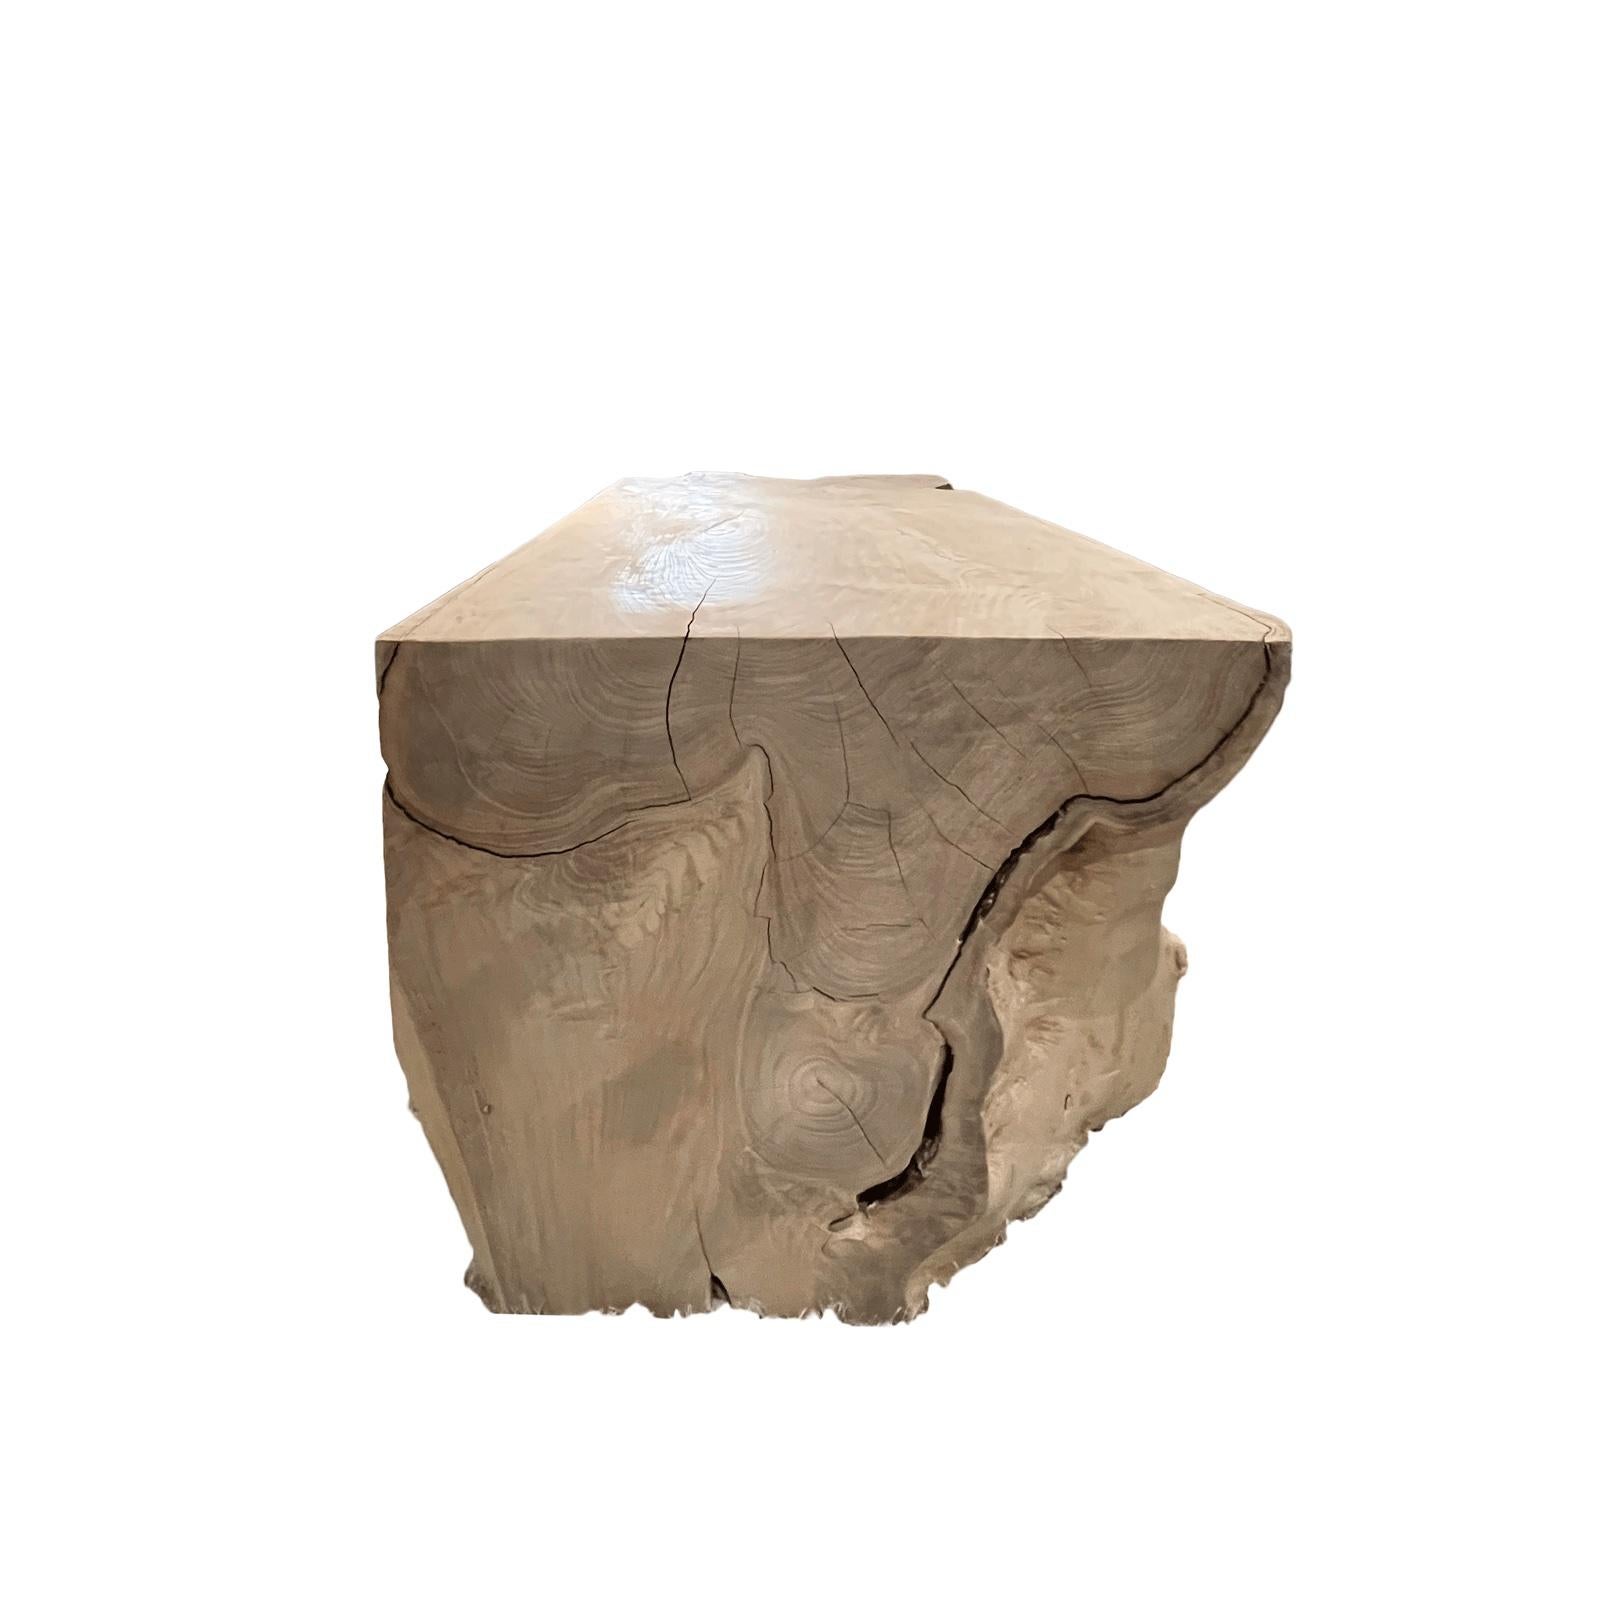 Uniquely shaped teak root table. Beautiful smooth top surface makes it ideal as a coffee table in your favorite room. One of a kind item!